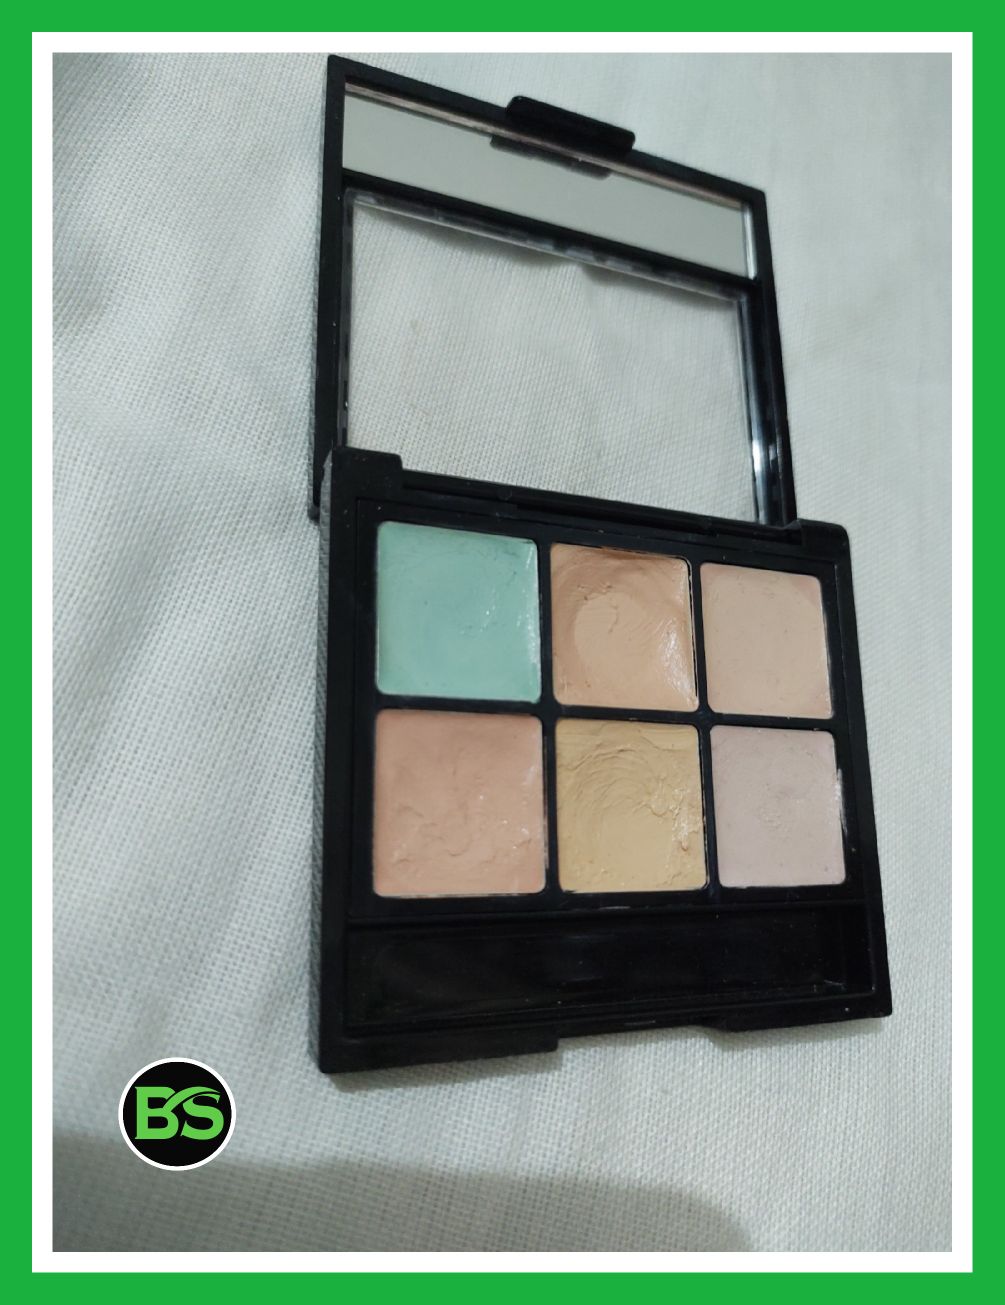 Maybelline Color Corrector review 